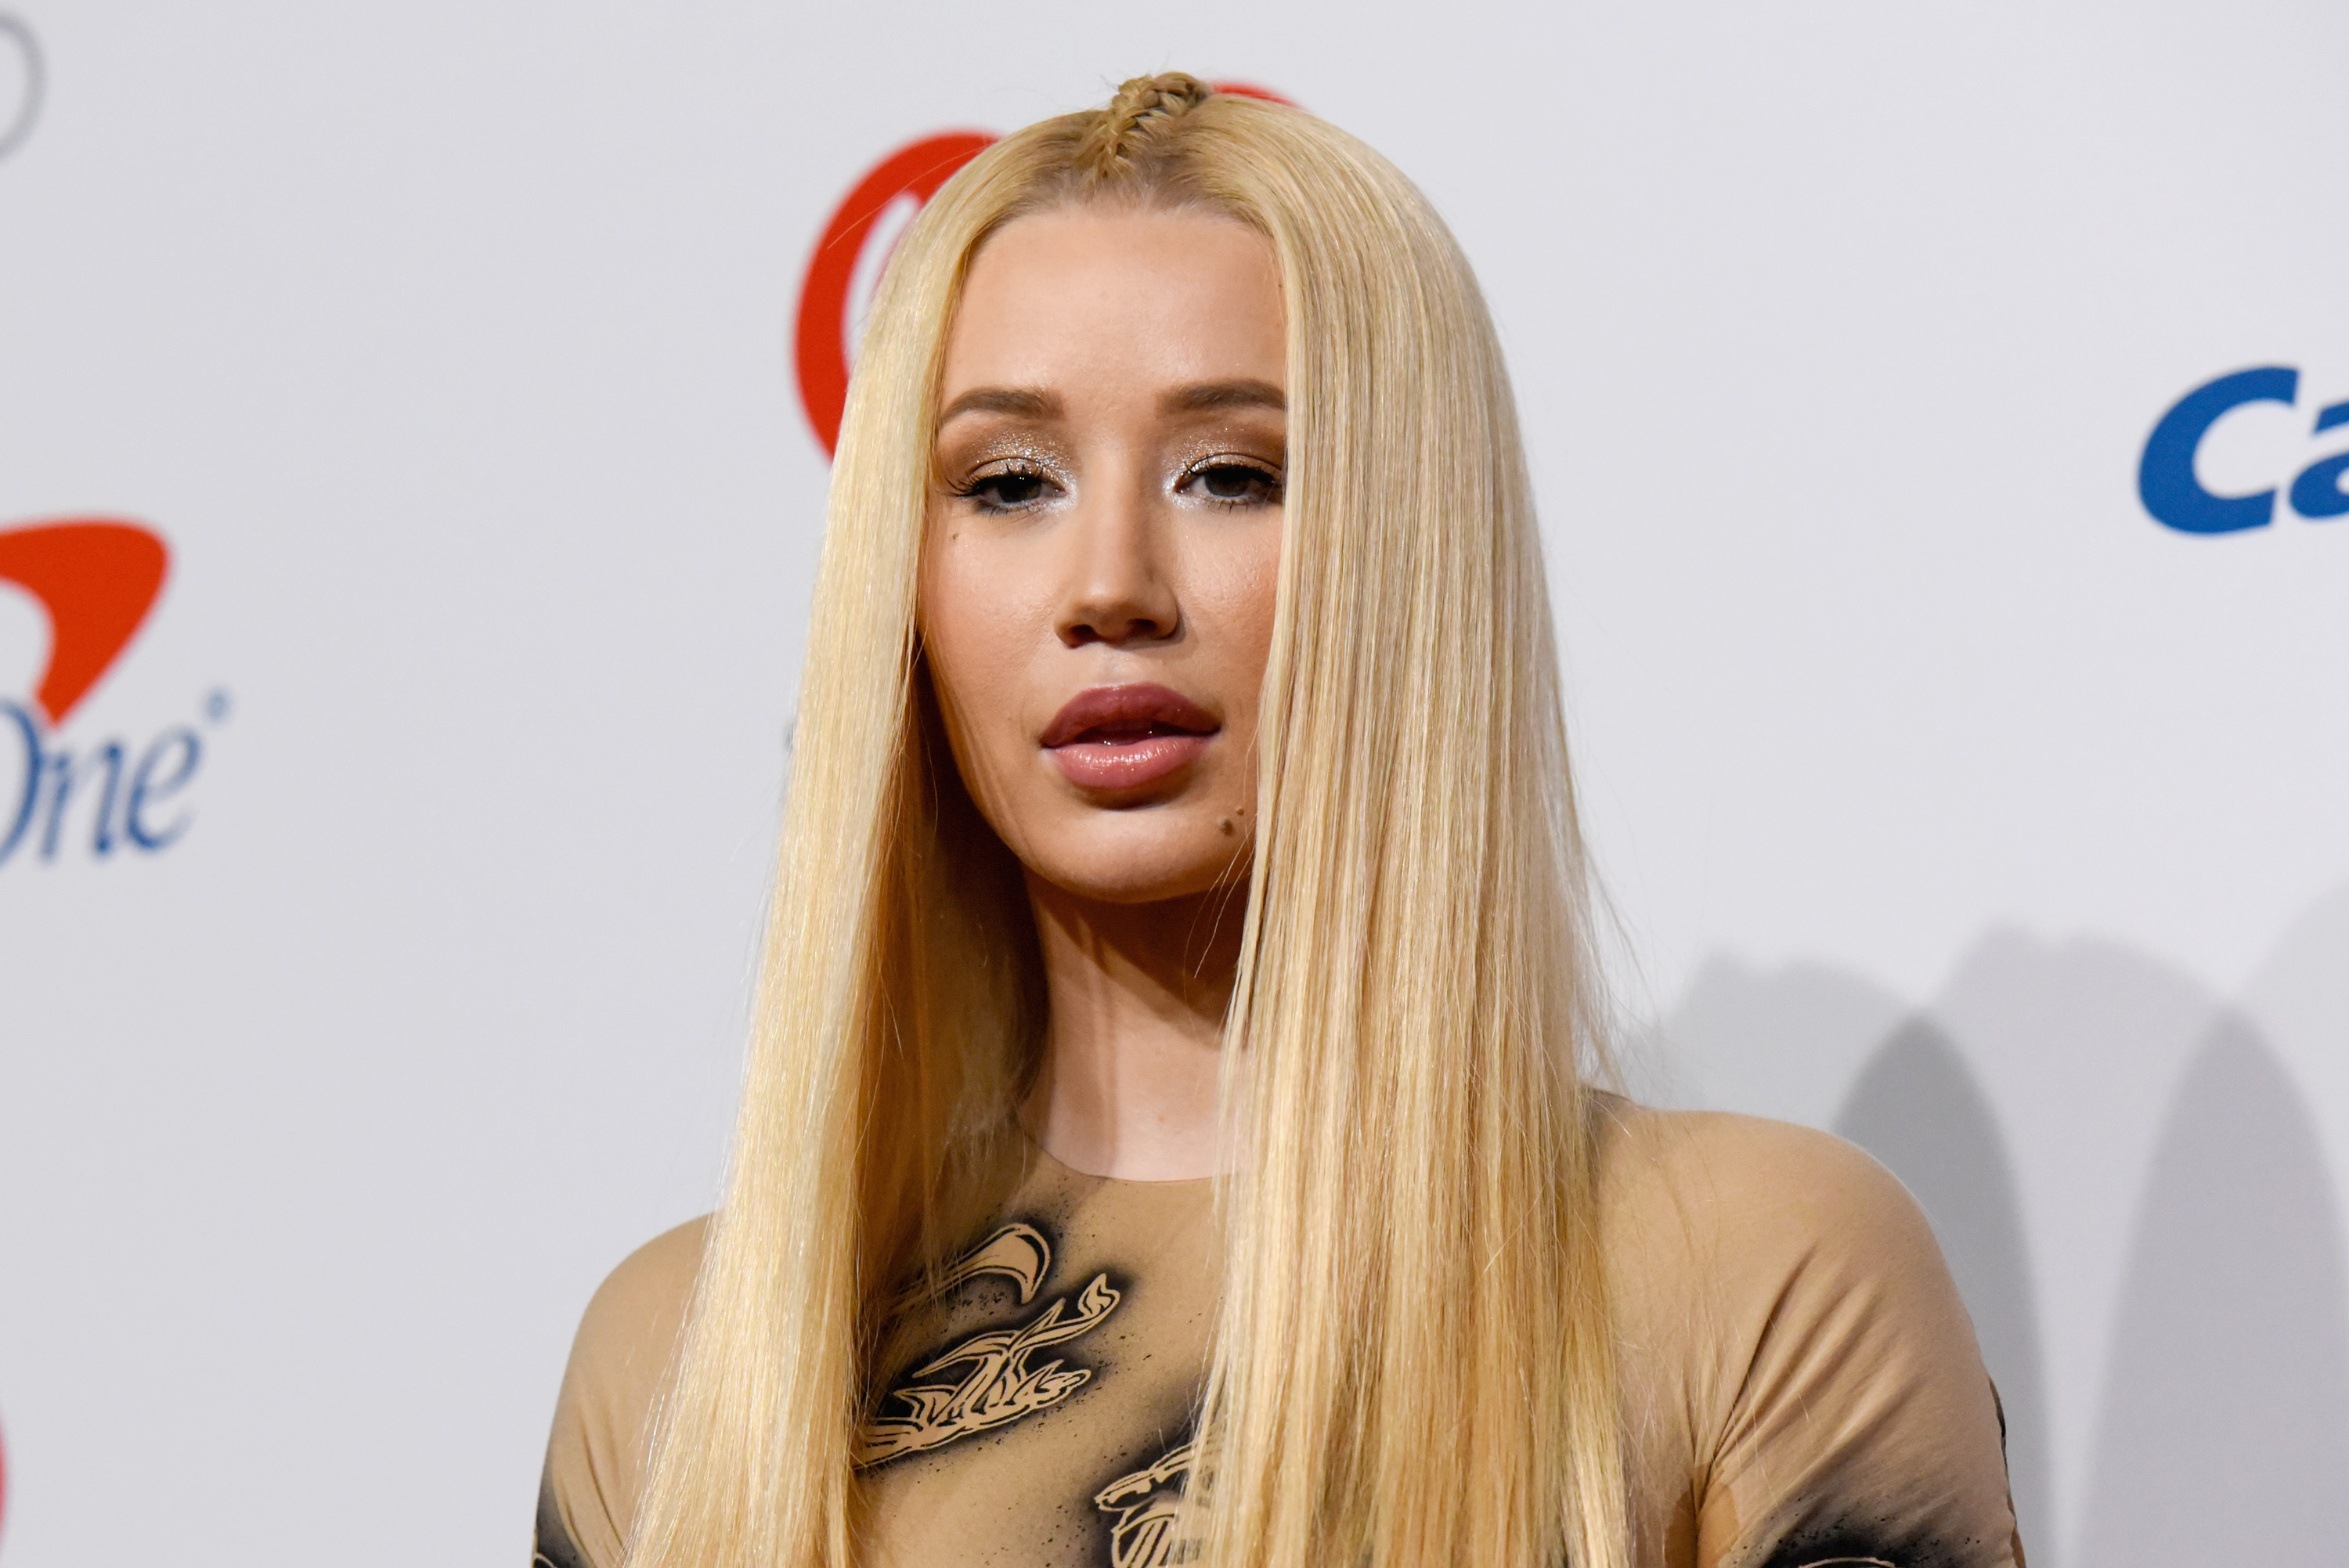 Iggy Azalea Switches Things Up And Debuts New Pink Hair